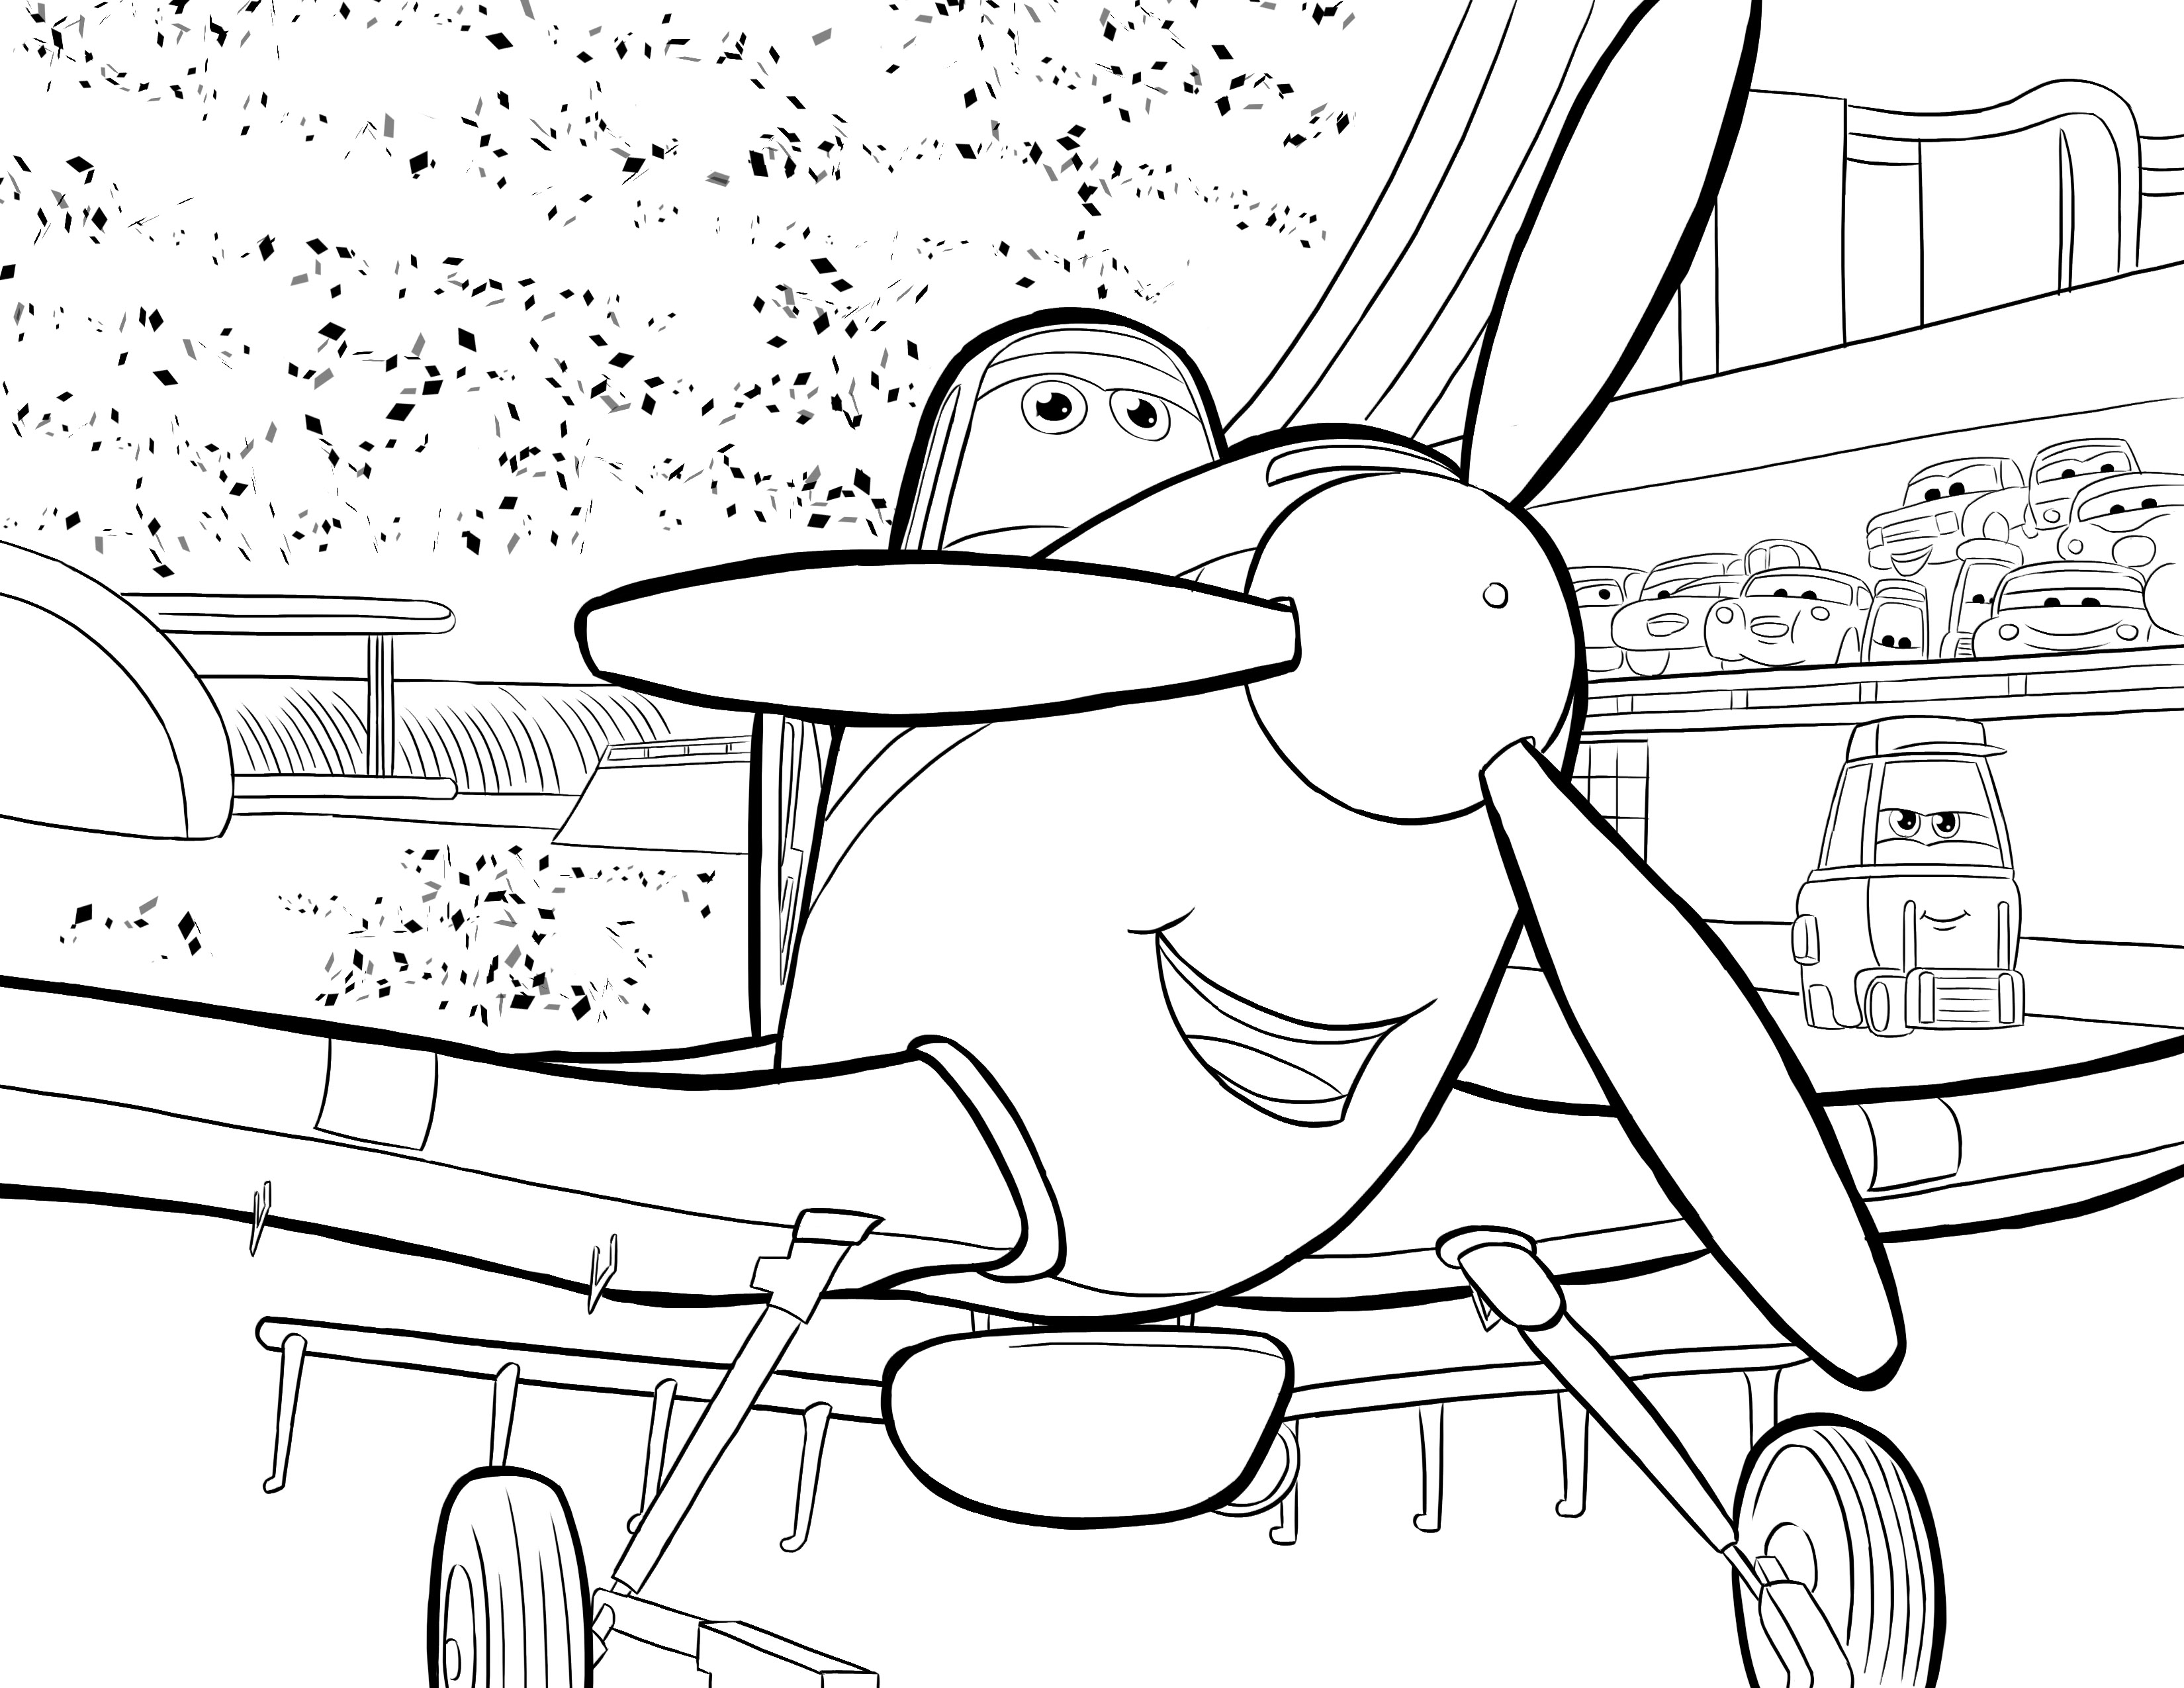 Plane coloring pages to download and print for free